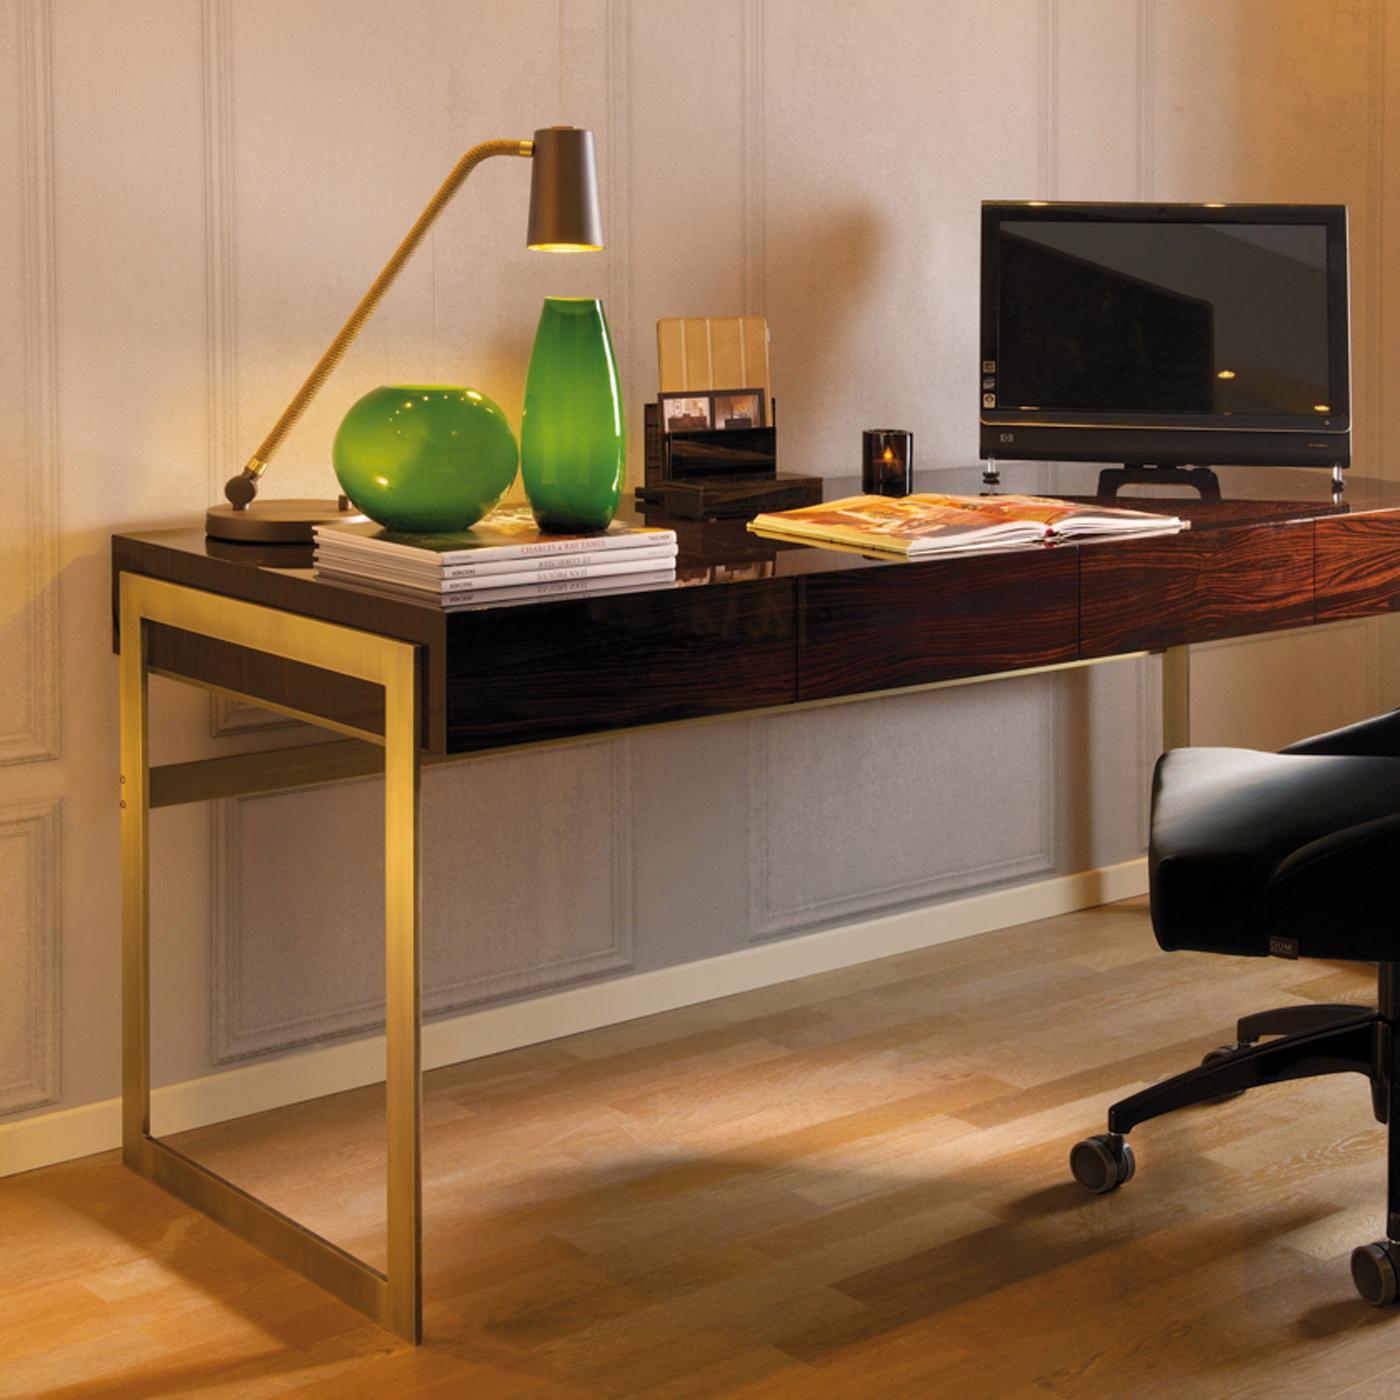 Masterfully handcrafted by expert artisans, this desk combines luxurious materials with a minimalist design aesthetic that will add timeless elegance to any home or office. Evoking a feeling of visual lightness, the rectangular Macassar